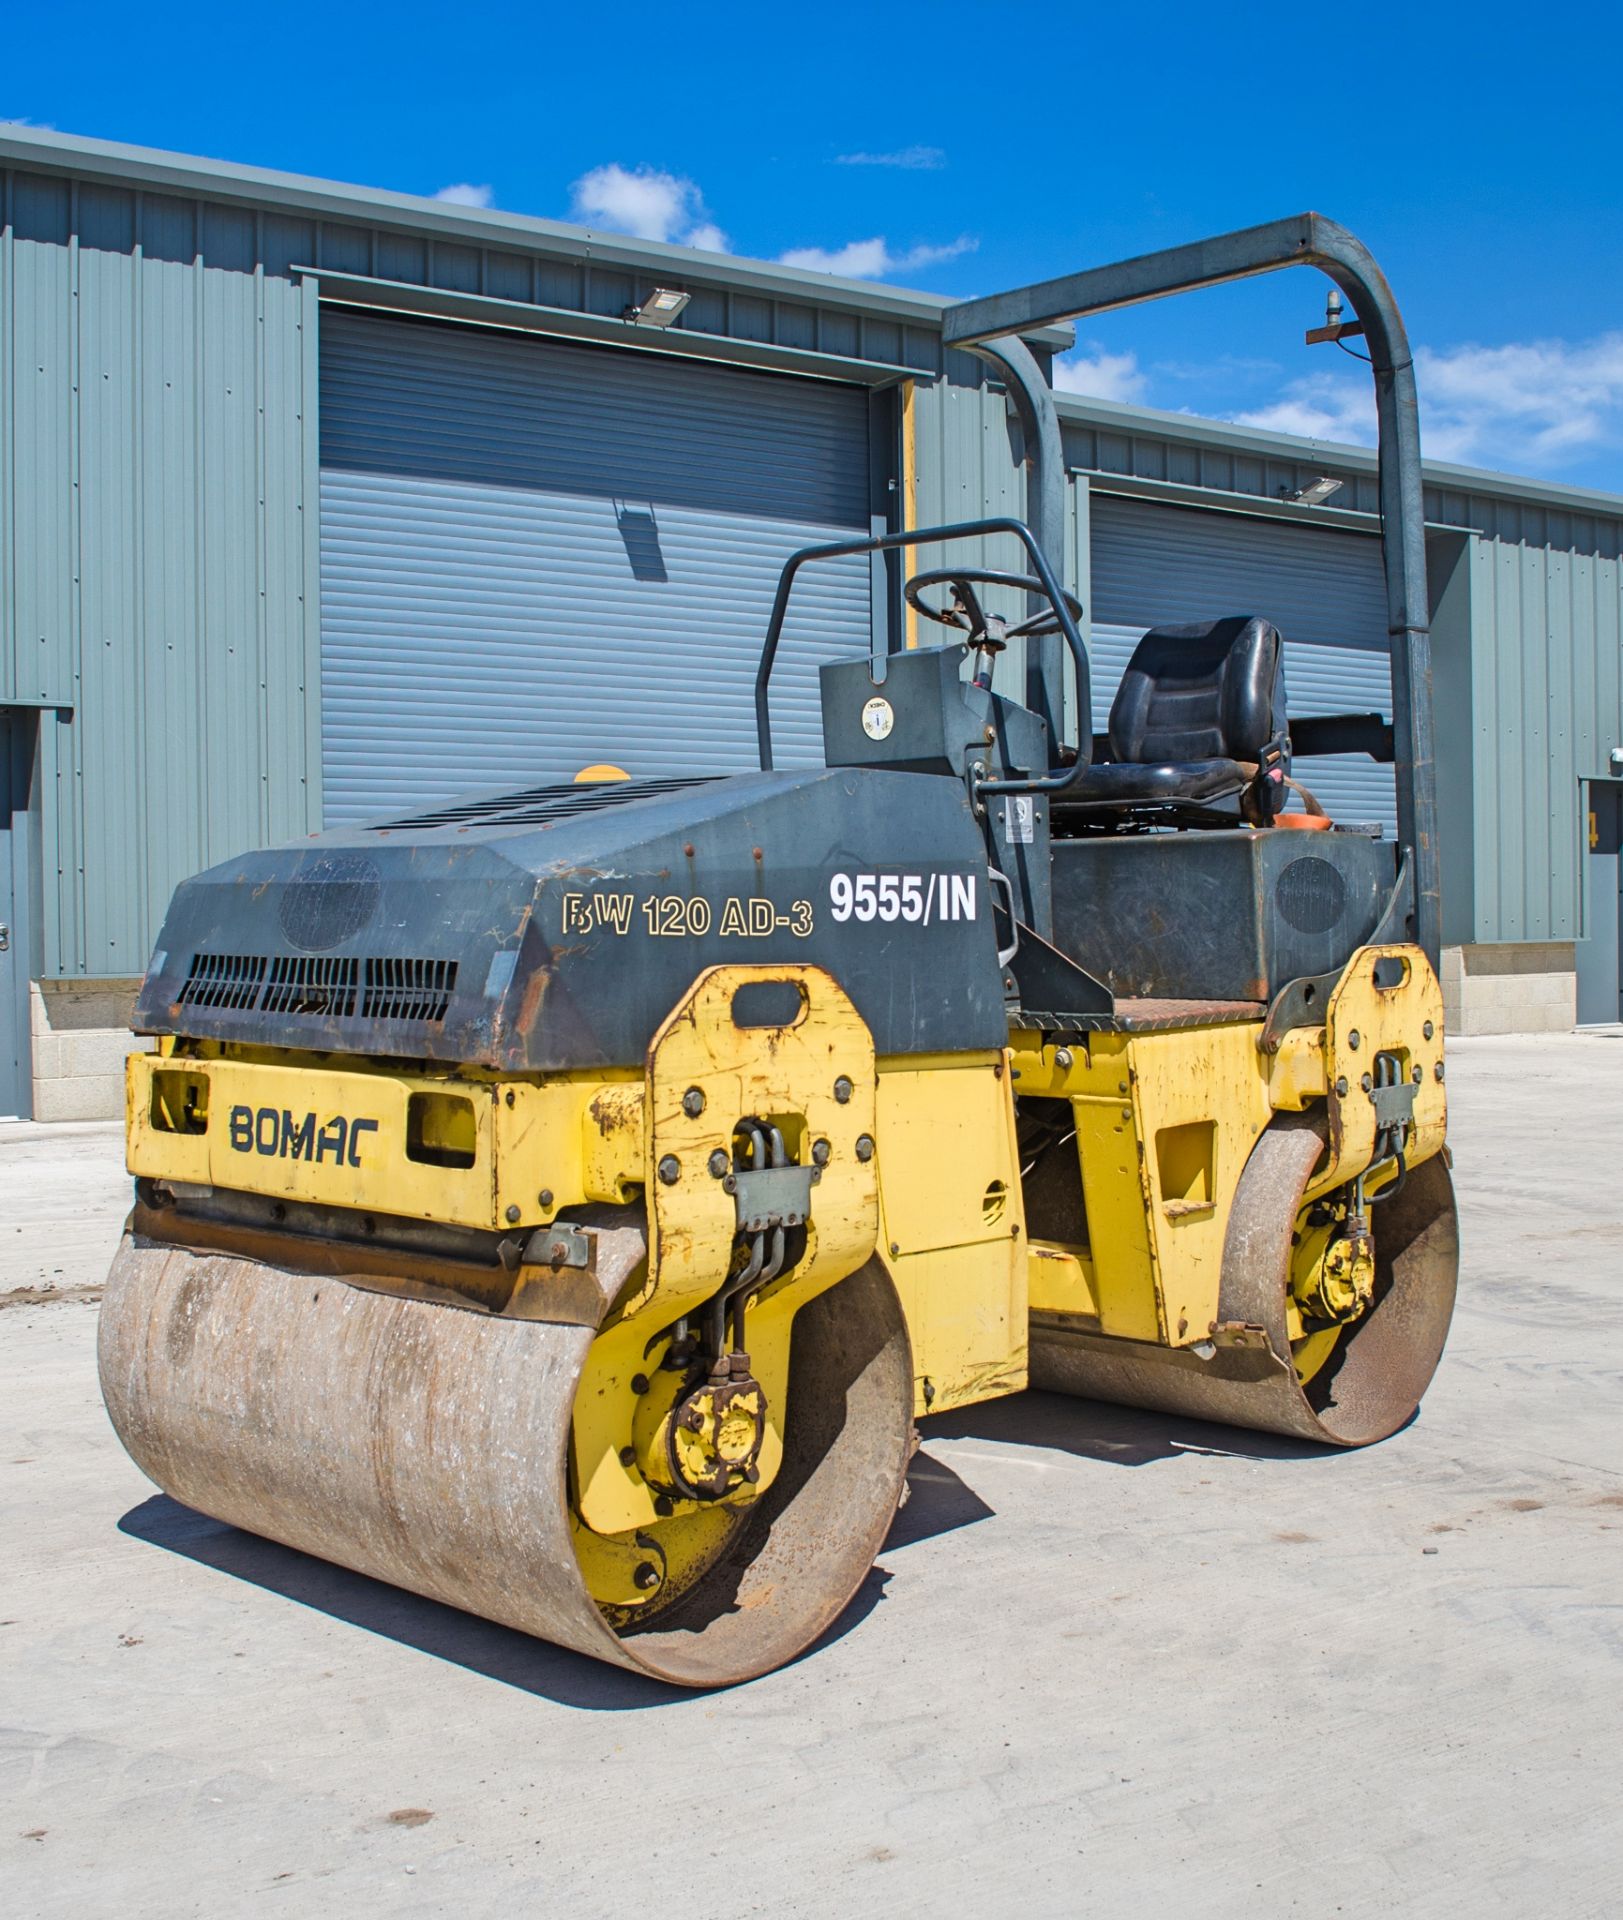 Bomag BW120 AD-3 double drum ride on roller Year: 2000 S/N: 515453 Recorded Hours: 713 SHC 9555/IN